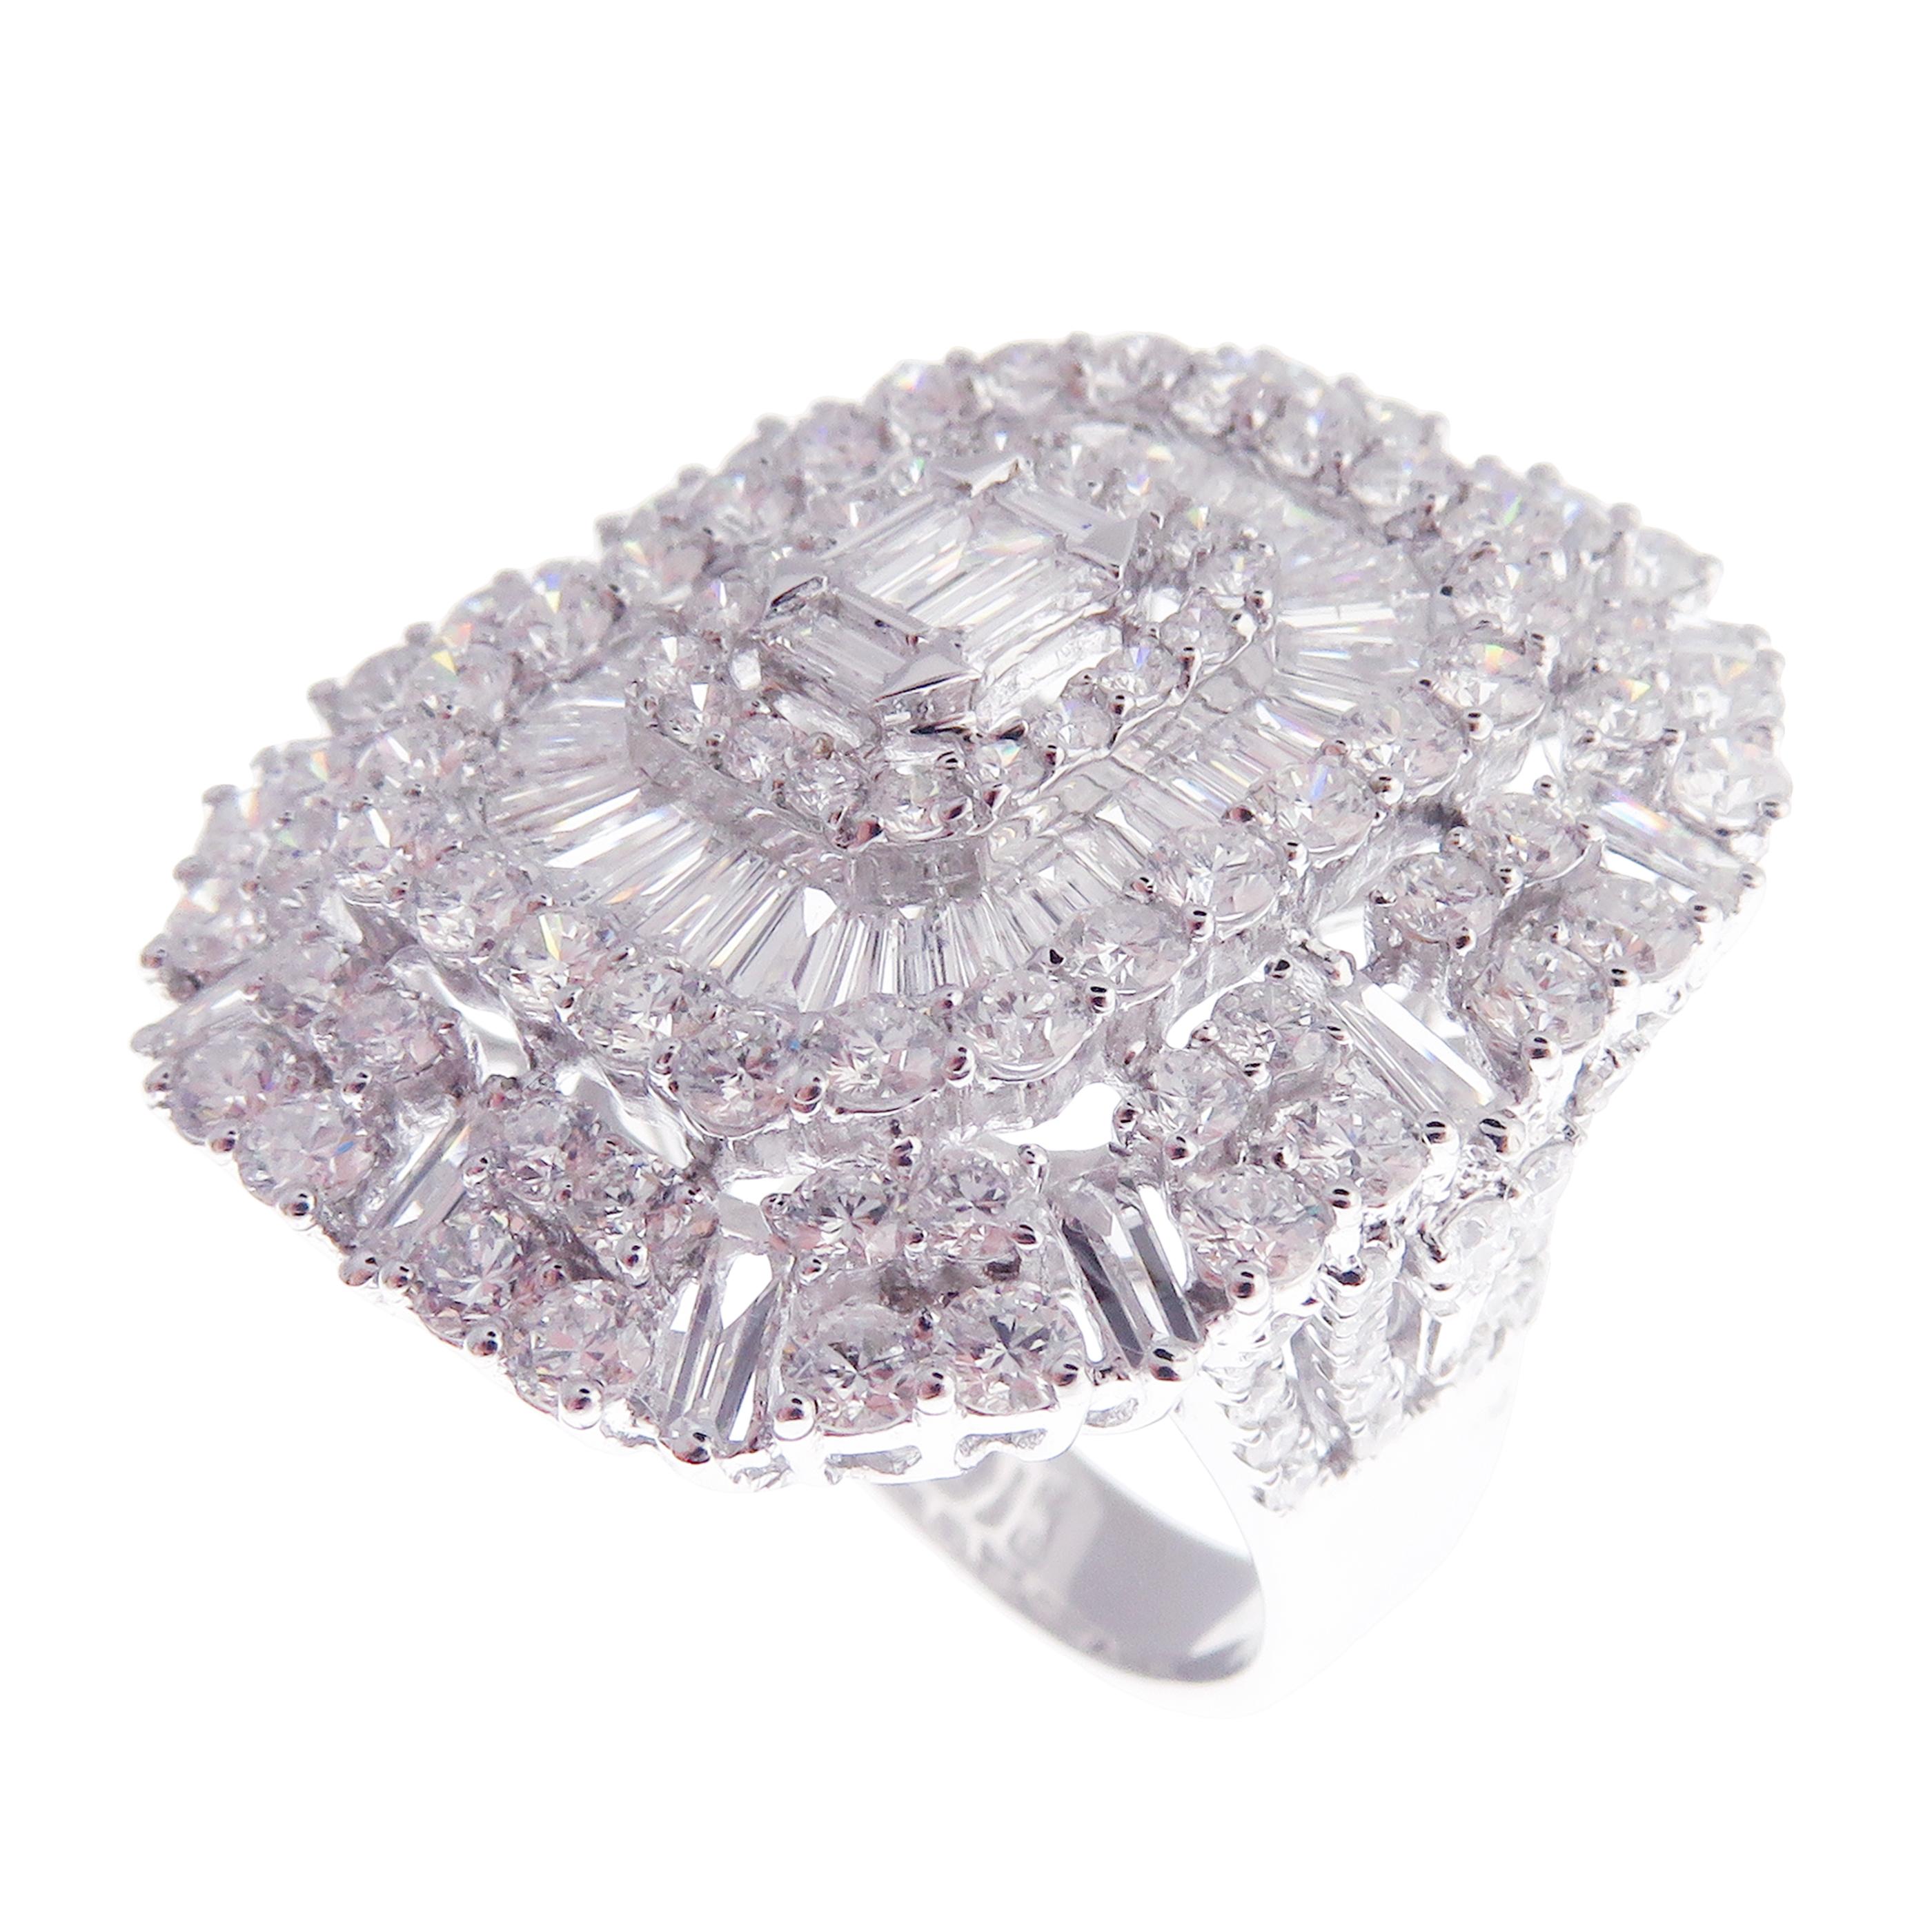 This baguette rectangular diamond ring is crafted in 18-karat white gold, weighing approximately 5.41 total carats of SI-V Quality white diamonds. Diamond embellishments on ring shank and a modern design brings out the beauty of the ring. This ring